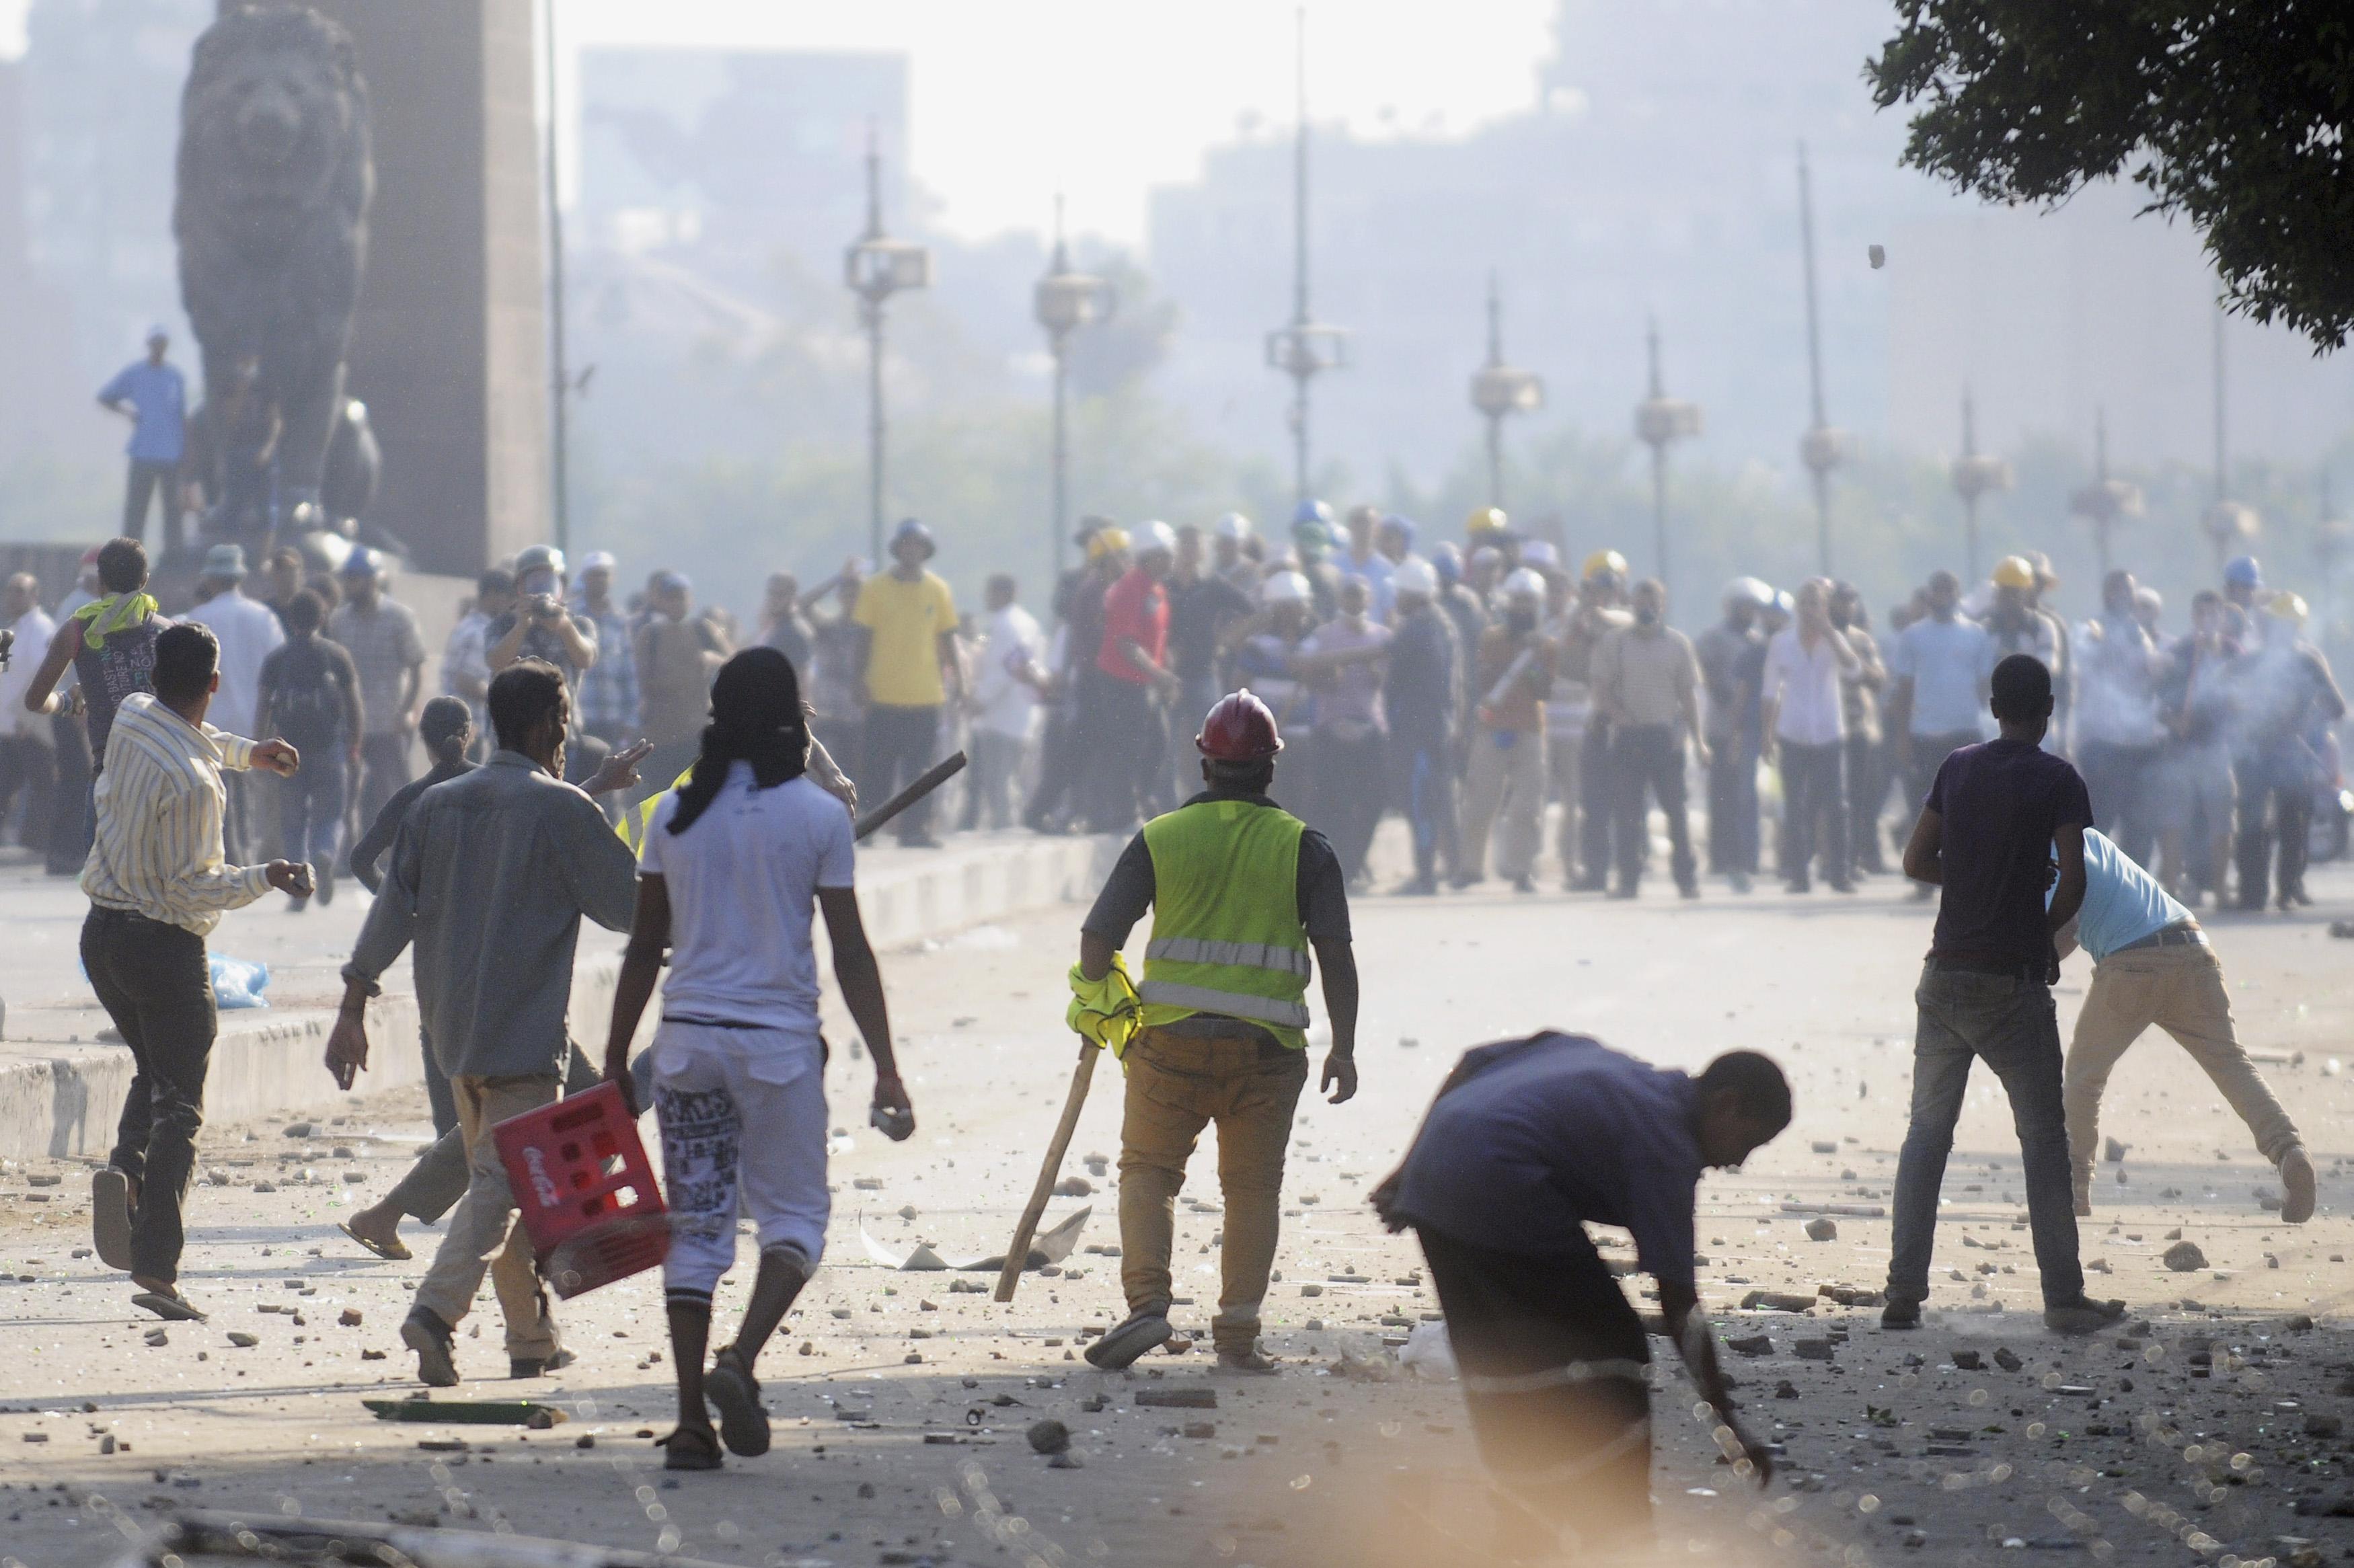 17 sentenced in absentia to life in prison over clashes following Mursi's ouster